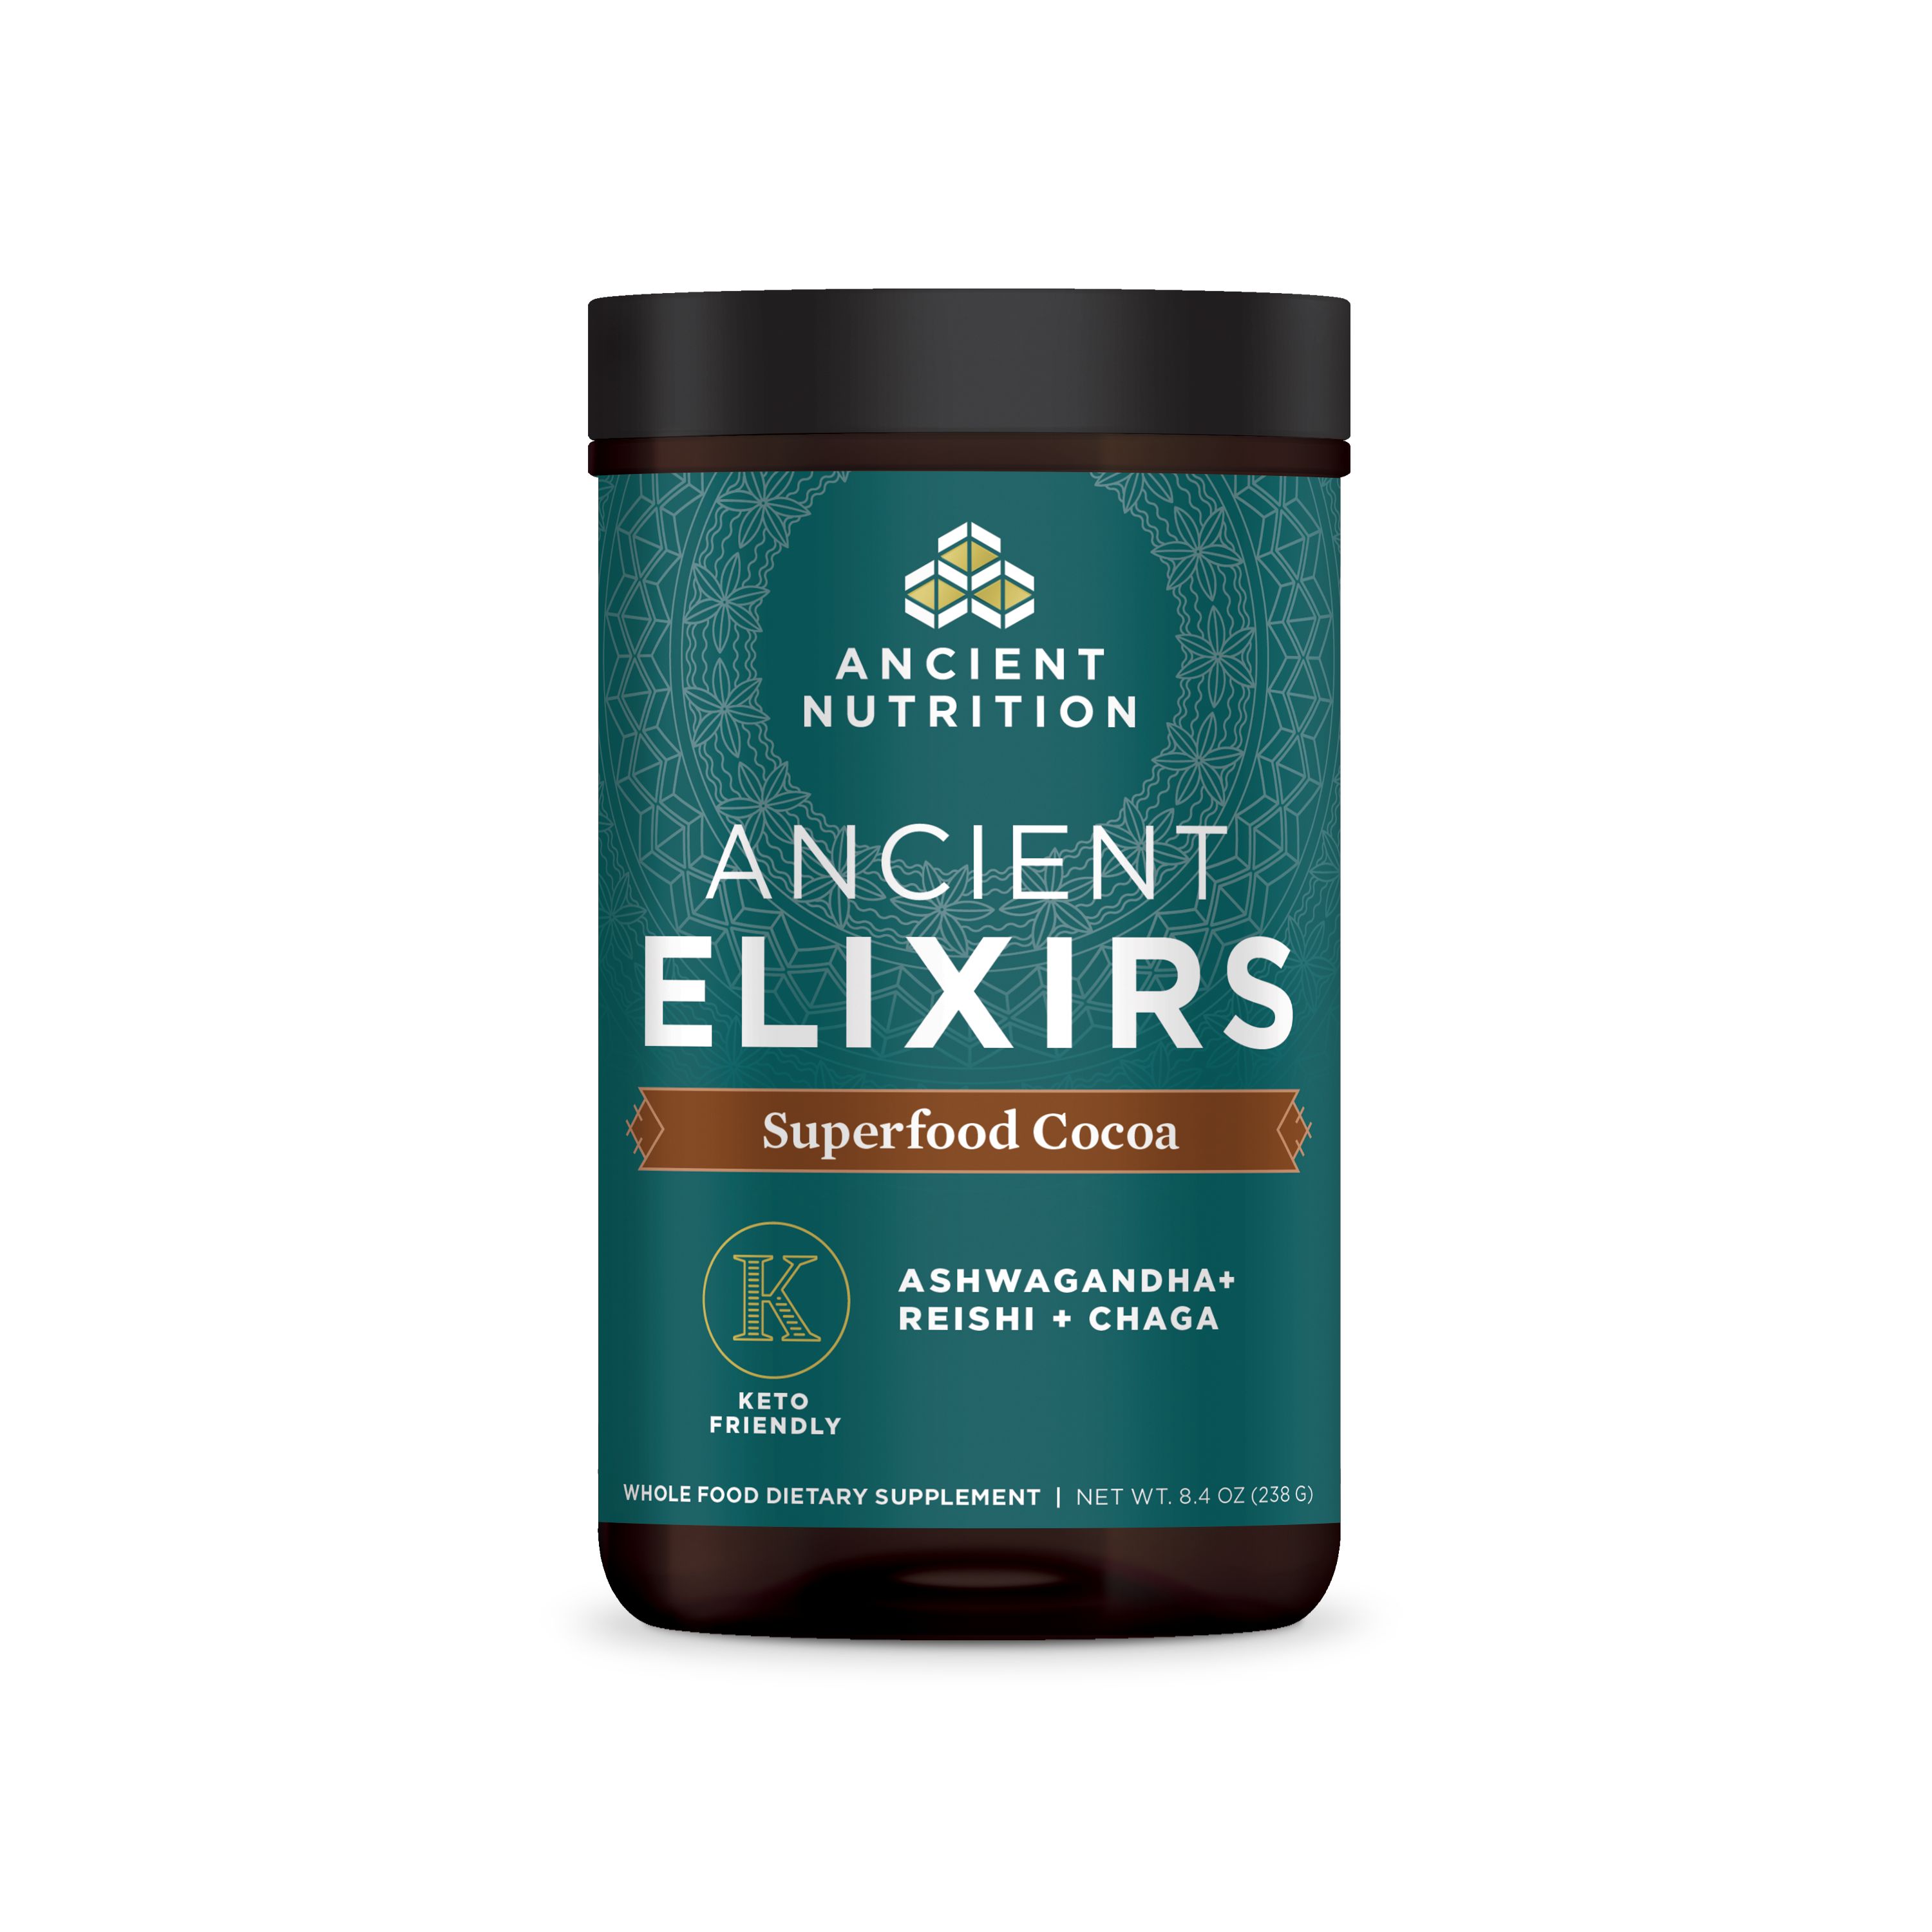 Ancient Elixirs Superfood Cocoa Powder (20 Servings)